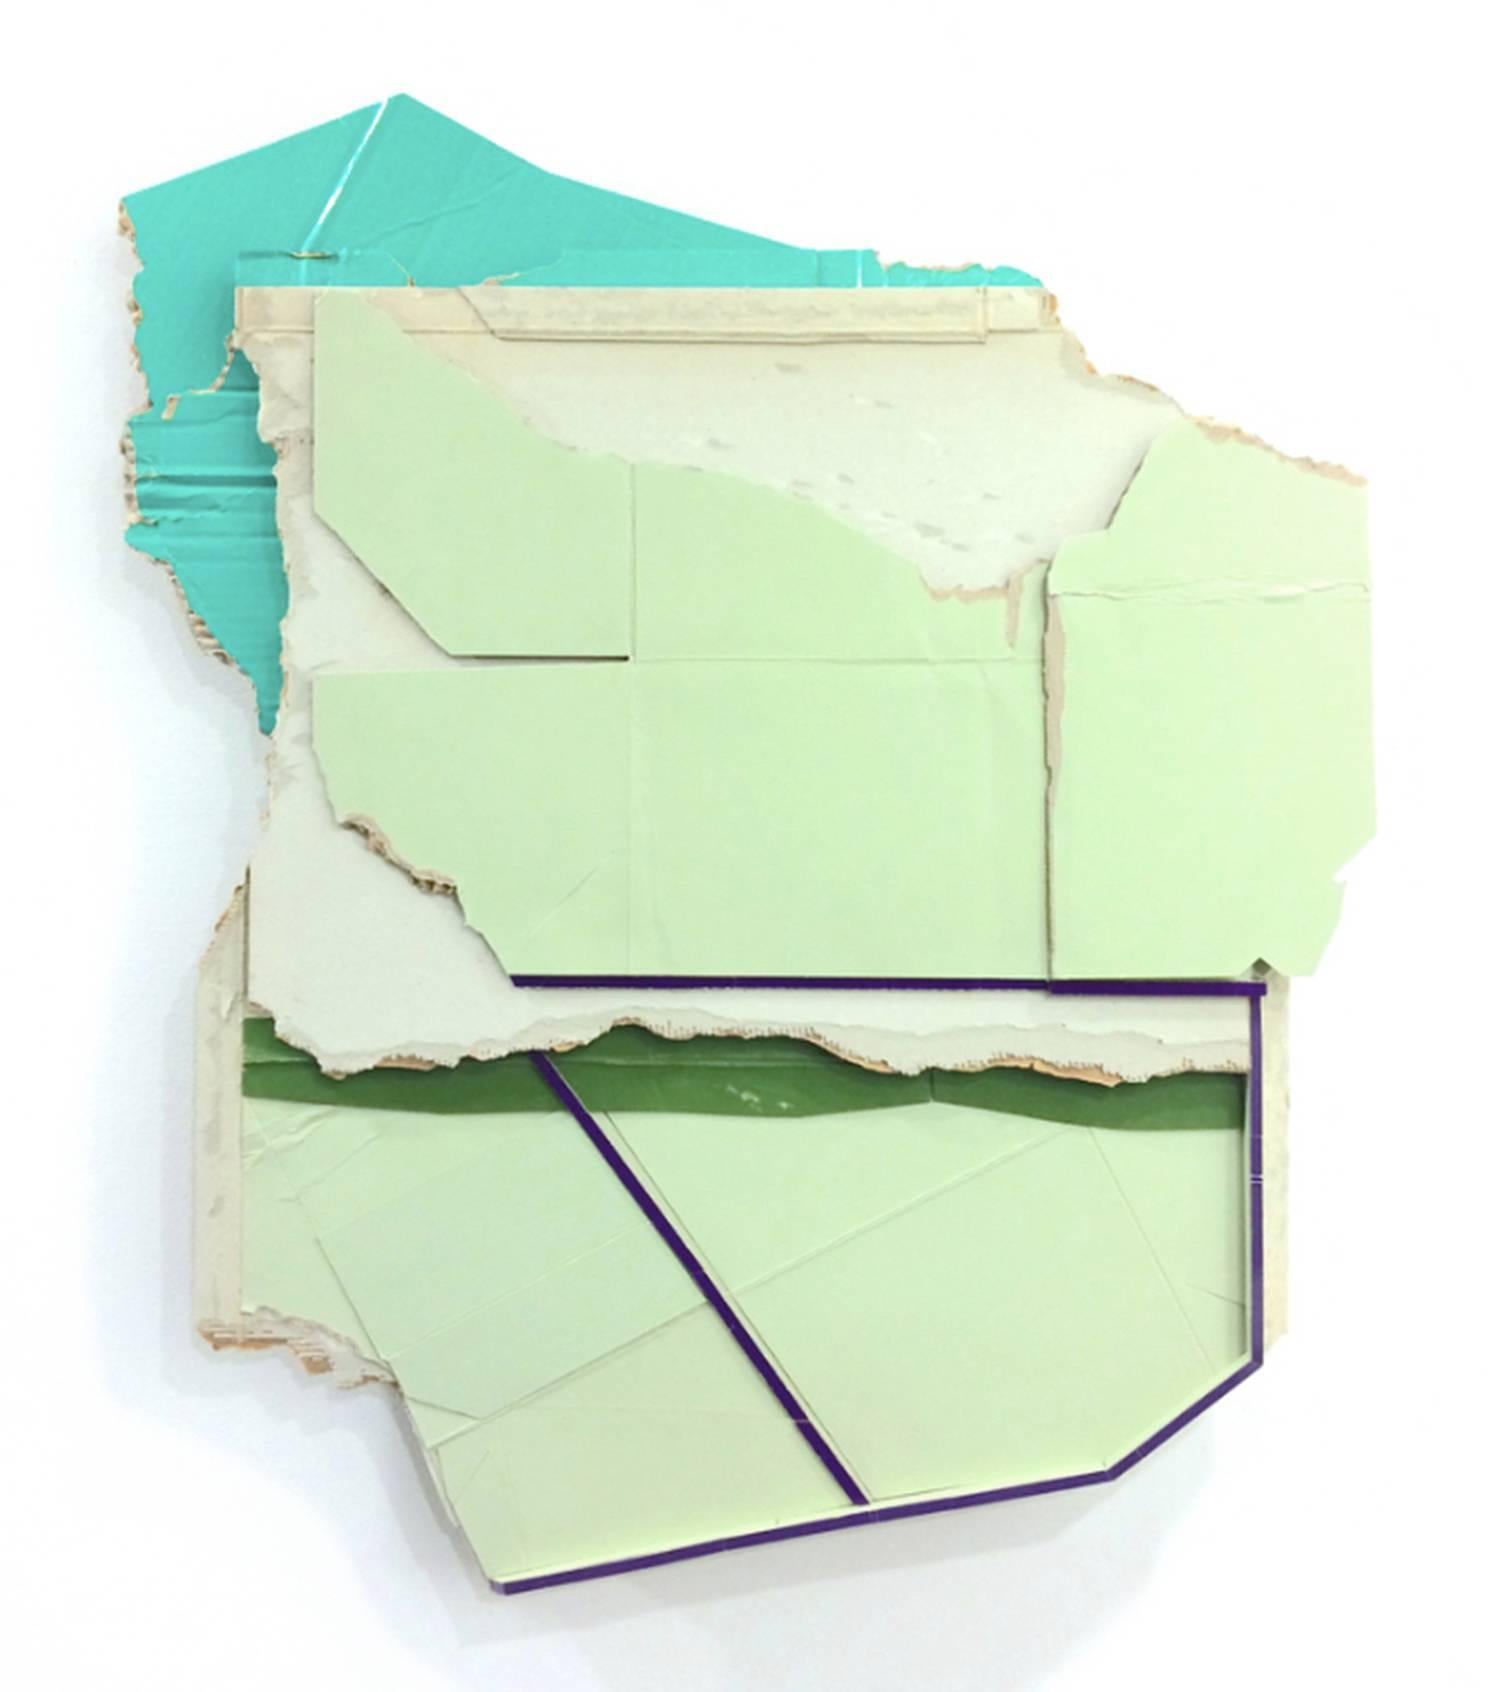 Ryan Sarah Murphy
Mainline, 2015
found unpainted cardboard and foamcore
31 x 25.5 x 2.5 in.

This abstract sculptural collage is bold and geometric, with raw organic edges of torn cardboard contrasted by sharp lines and precise geometric shapes in